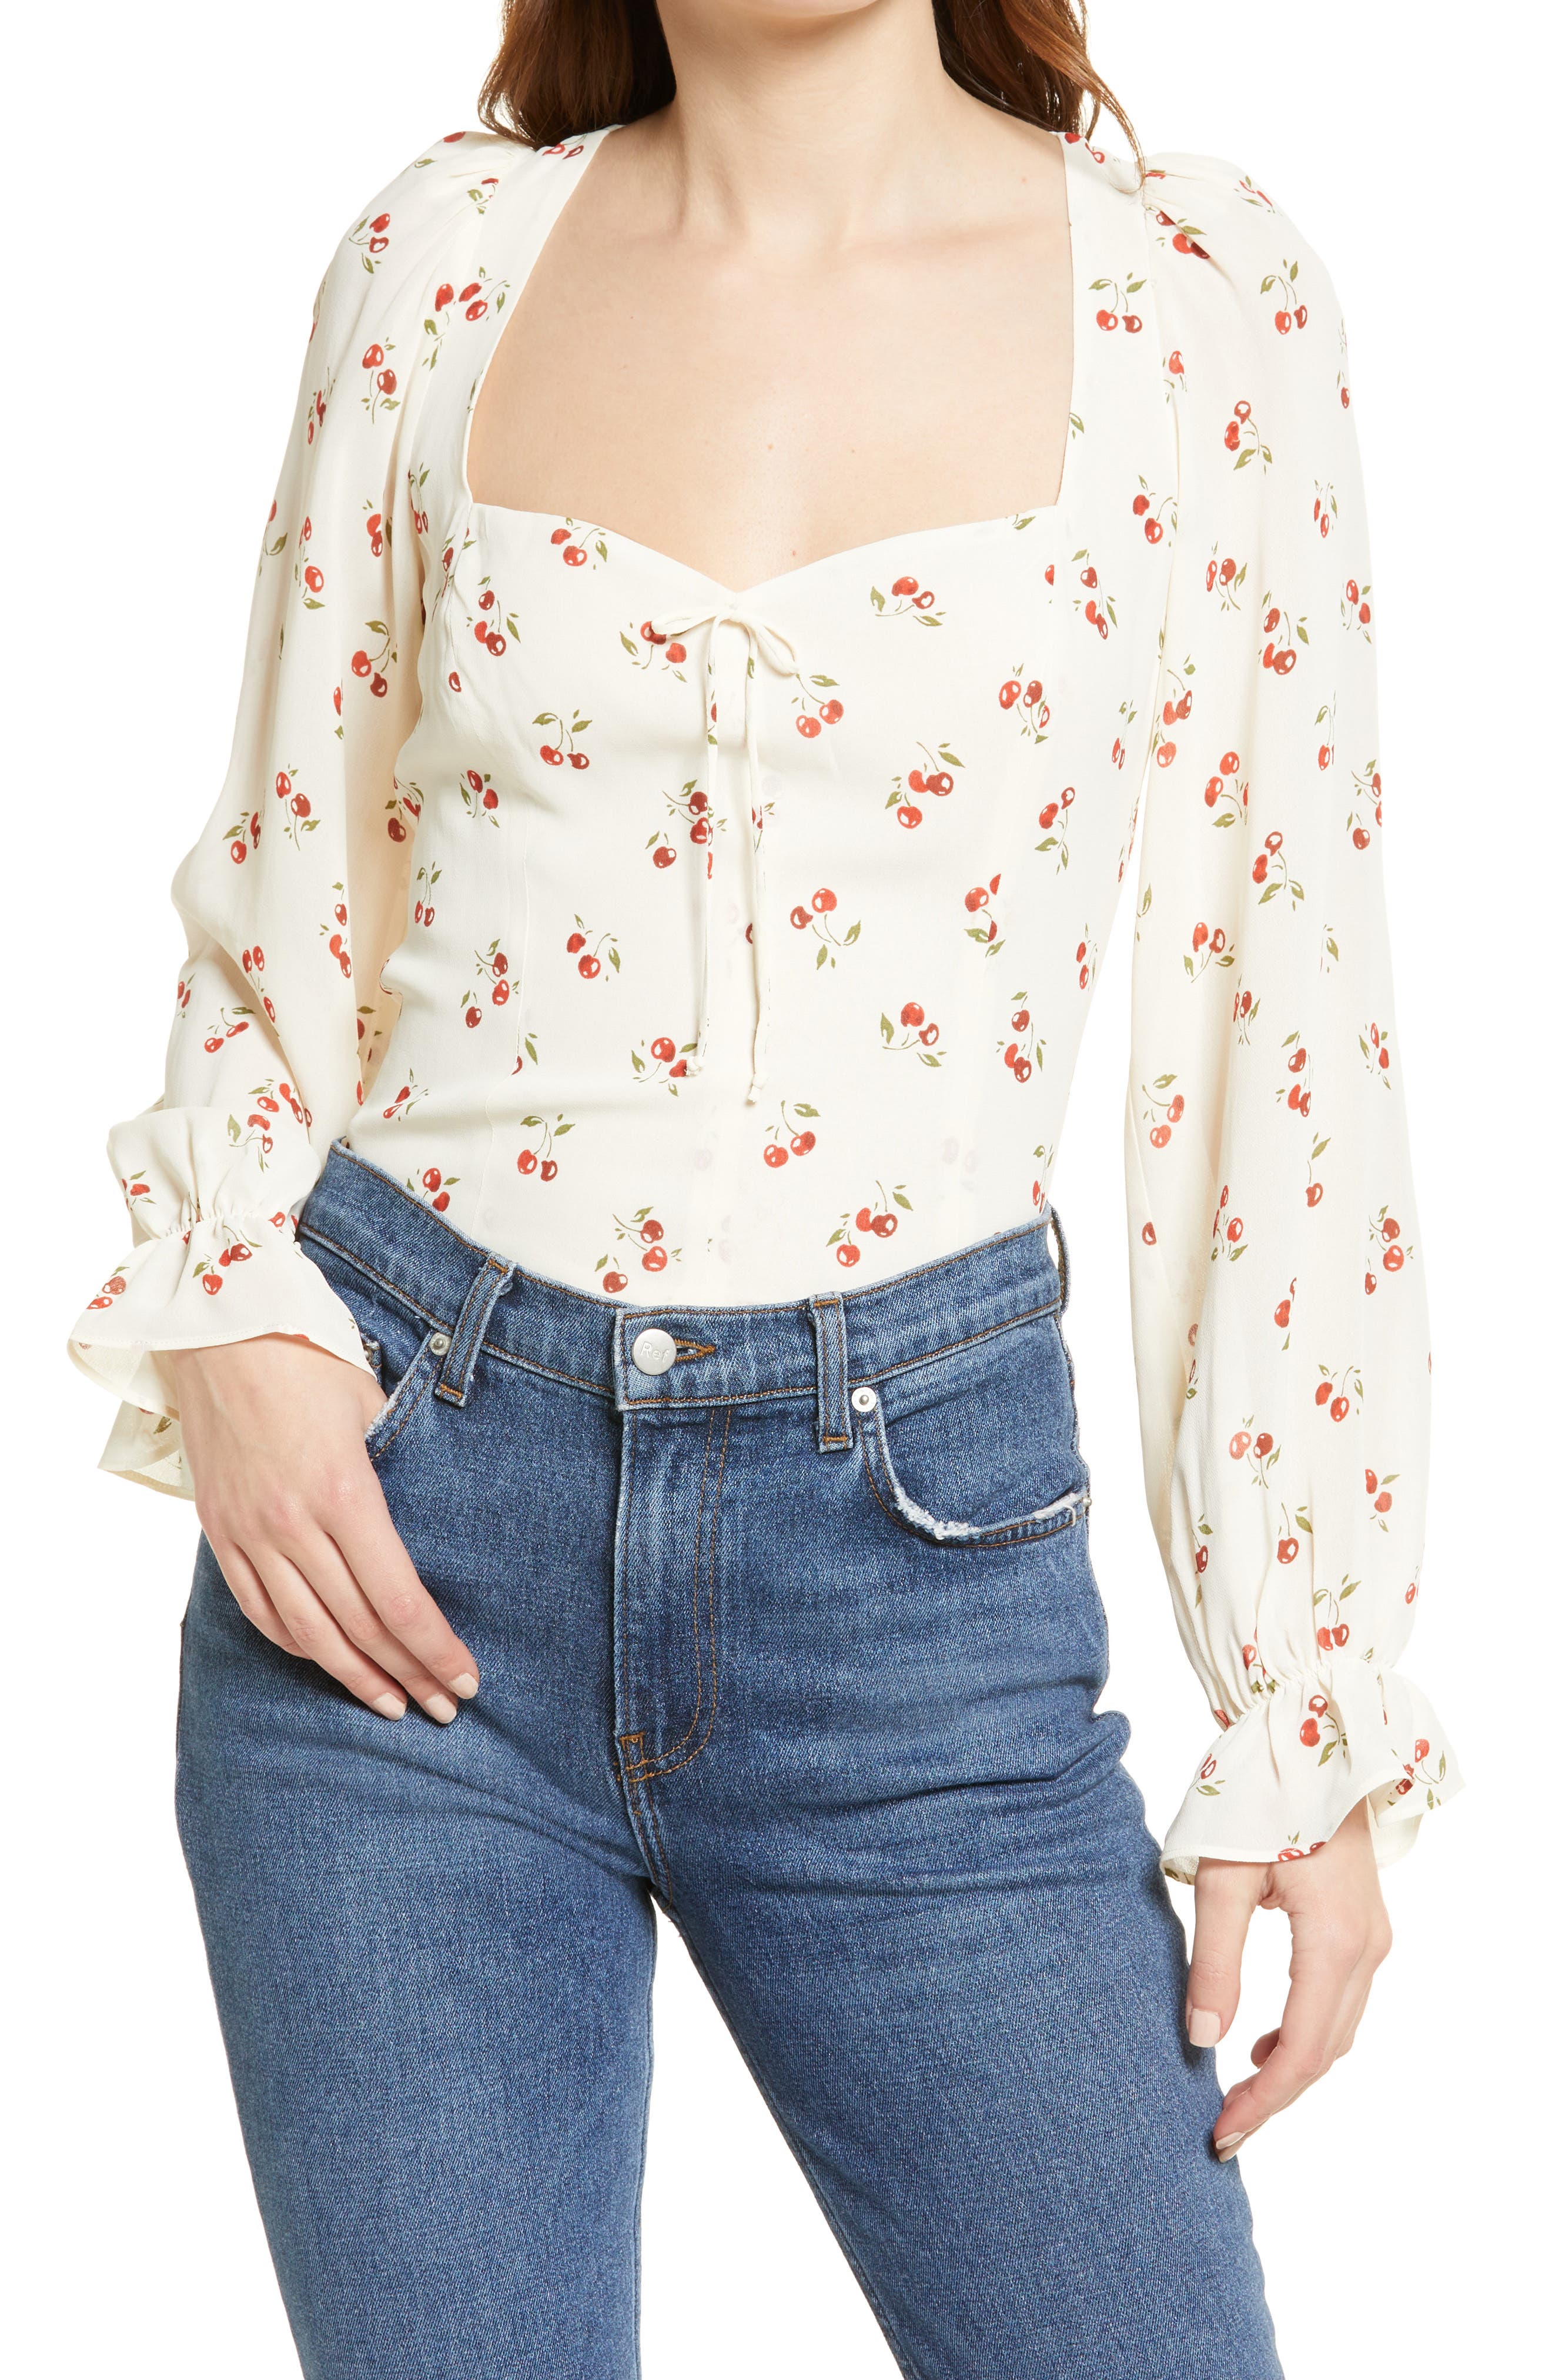 Reformation Chase Cherry Print Blouse in Cherry Pit at Nordstrom, Size 4